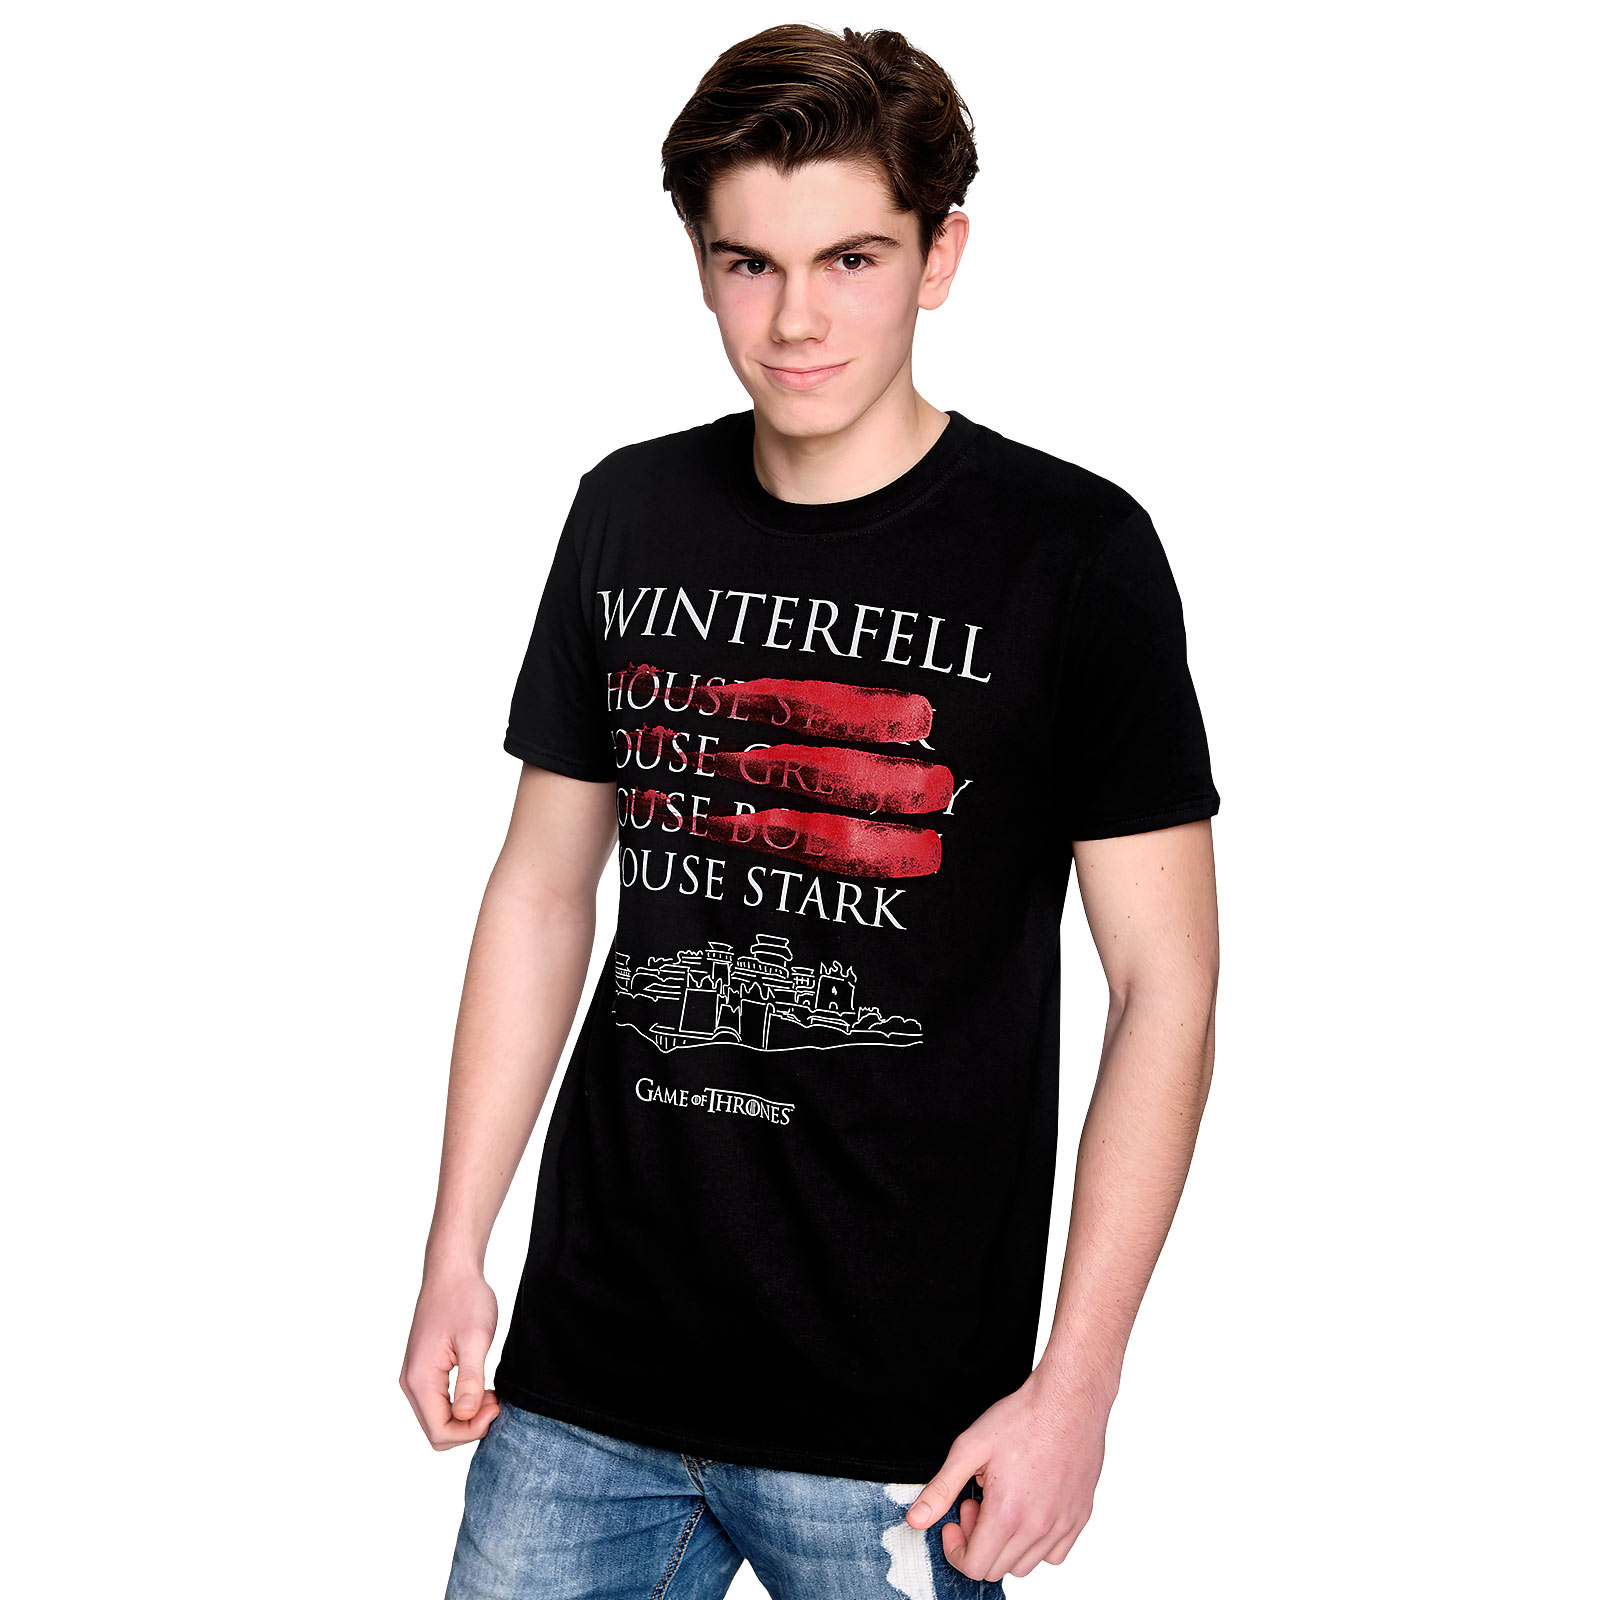 Game of Thrones - Winterfell Rulers T-Shirt black